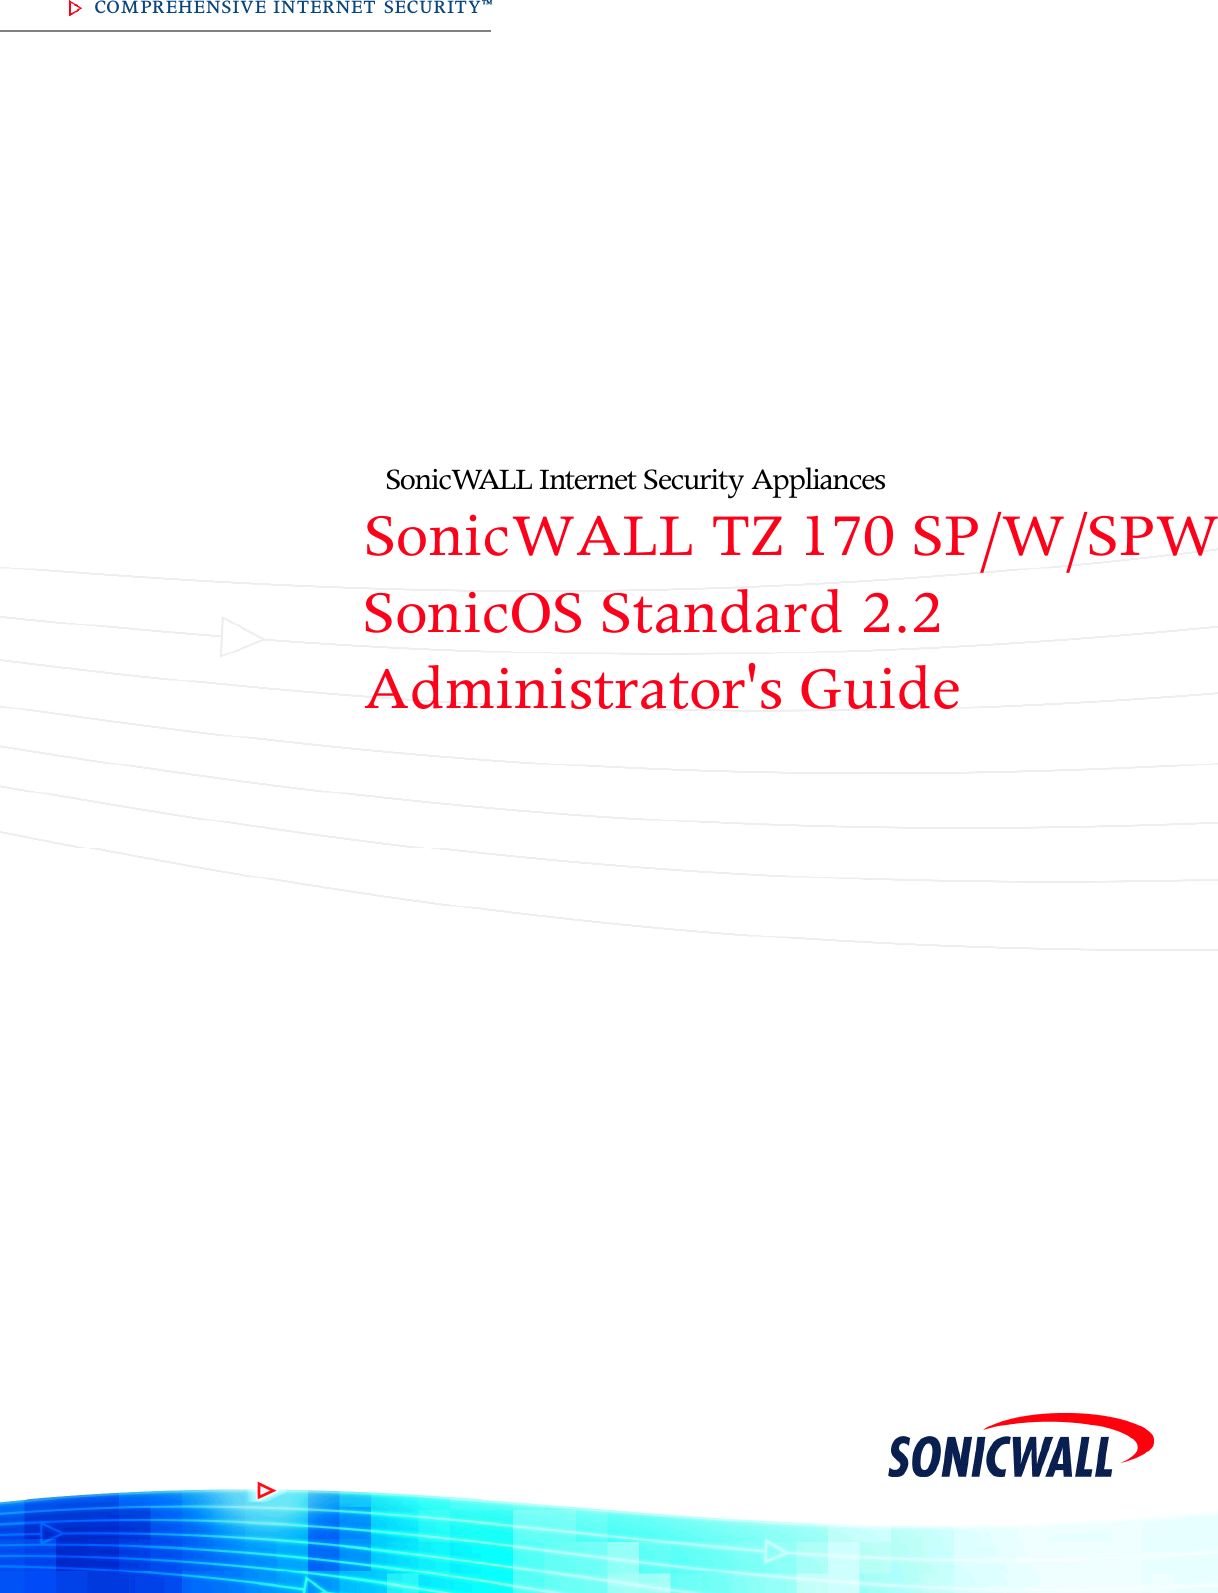 COMPREHENSIVE INTERNET SECURITY™S o n i c WALL Internet Security Ap p l i a n c e s  SonicWALL TZ 170 SP/W/SPWSonicOS Standard 2.2Administrator&apos;s Guide